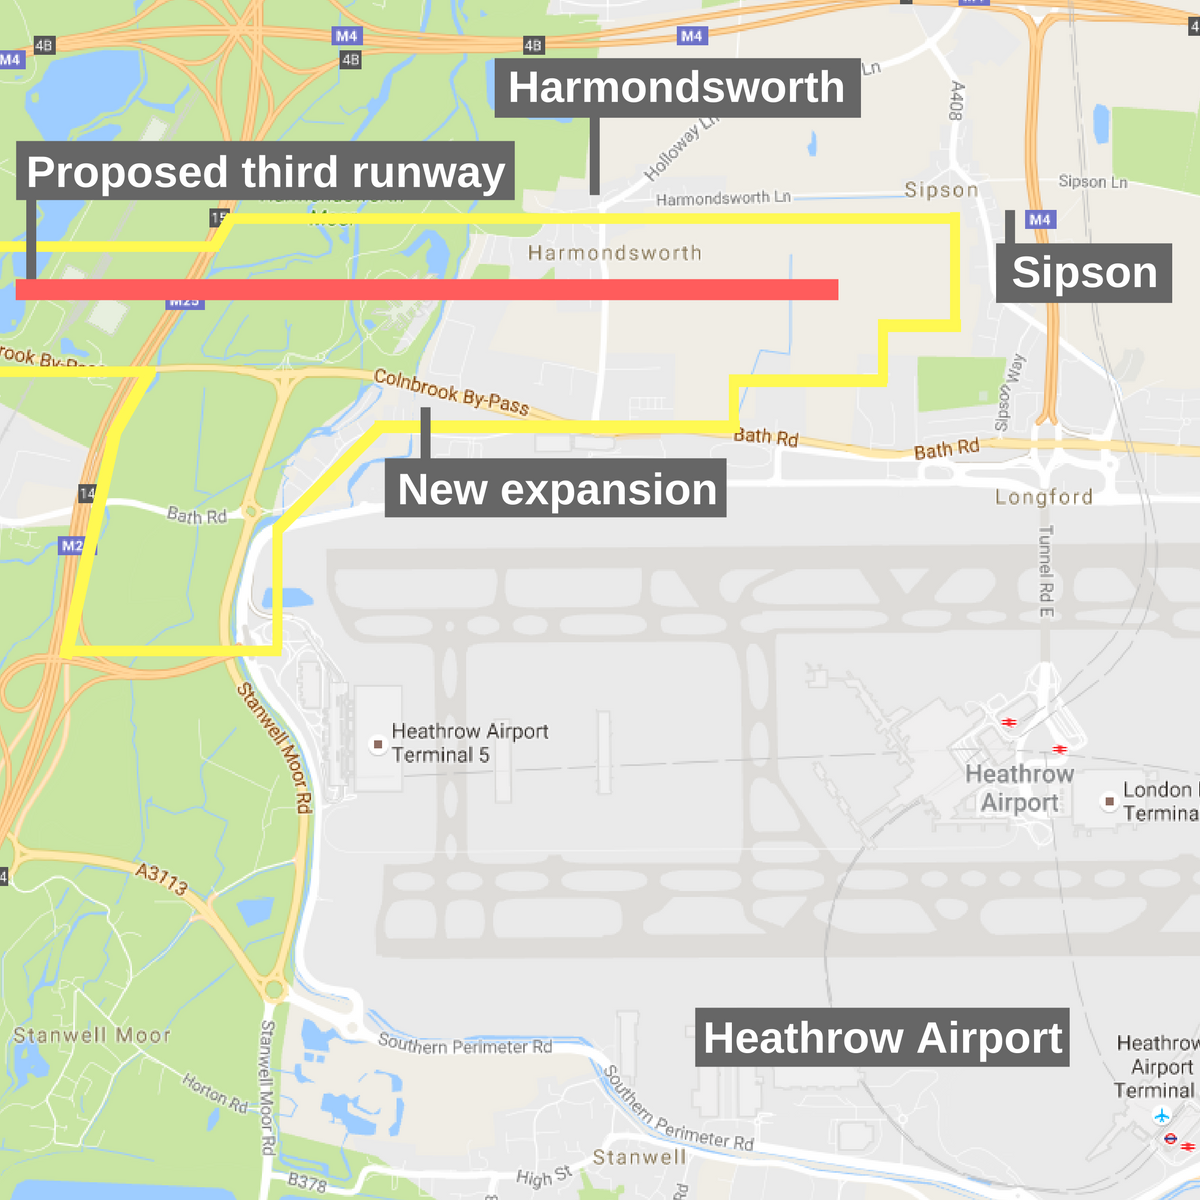 A map showing the new proposed expansion and rough location of the new third runway at Heathrow in relation to the villages of Harmondsworth and Sipson